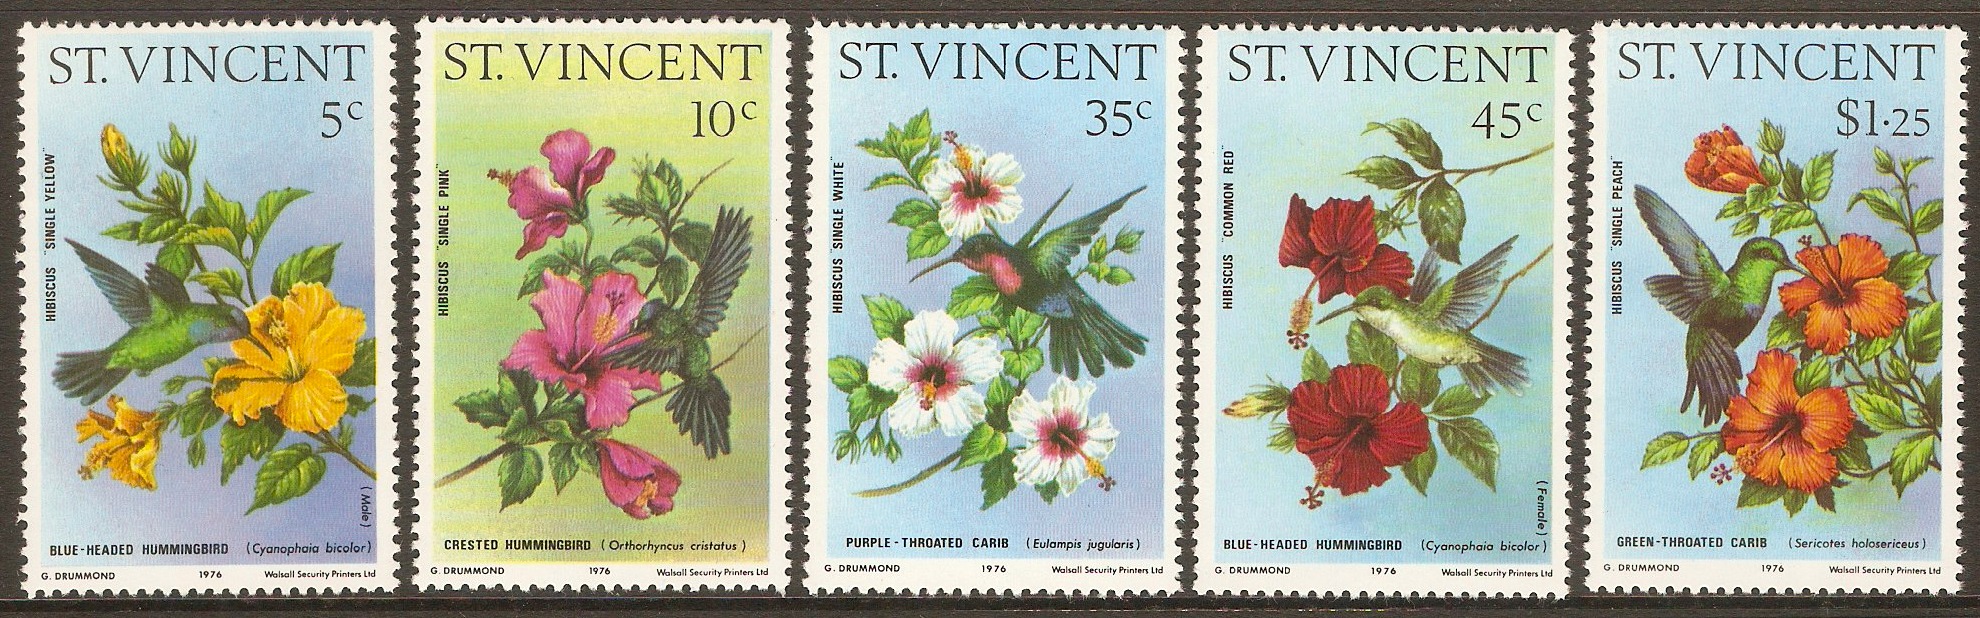 St Vincent 1976 Humming Birds and Hibiscuses set. SG487-SG491.